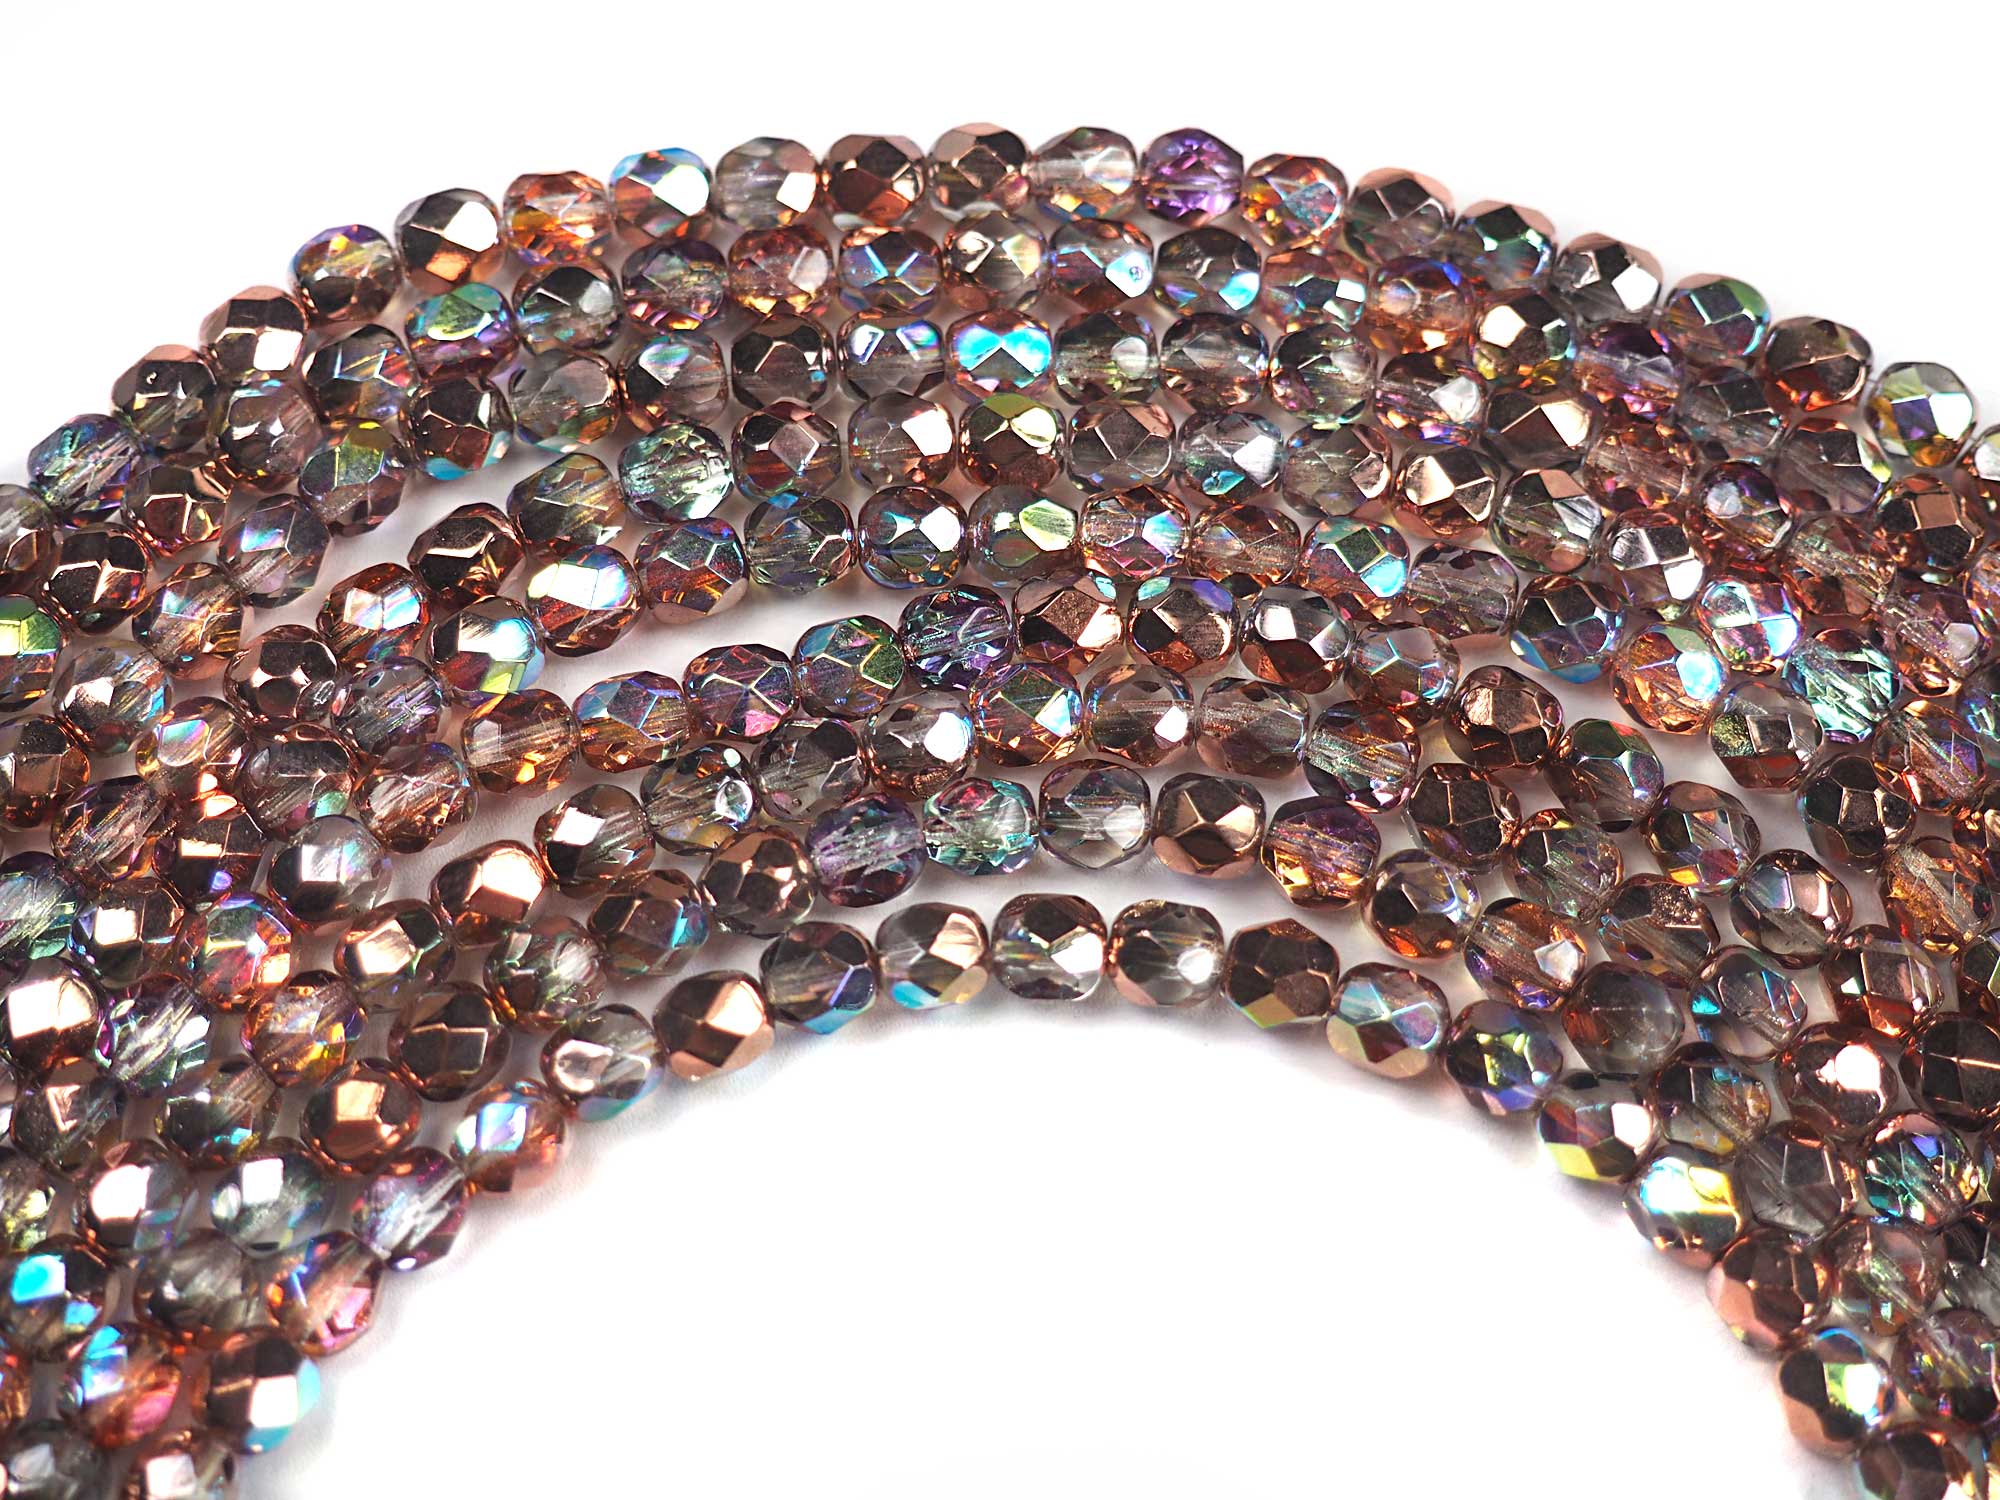 Crystal Copper Rainbow coated, Czech Fire Polished Round Faceted Glass Beads, 16" strand, Capri Gold with AB